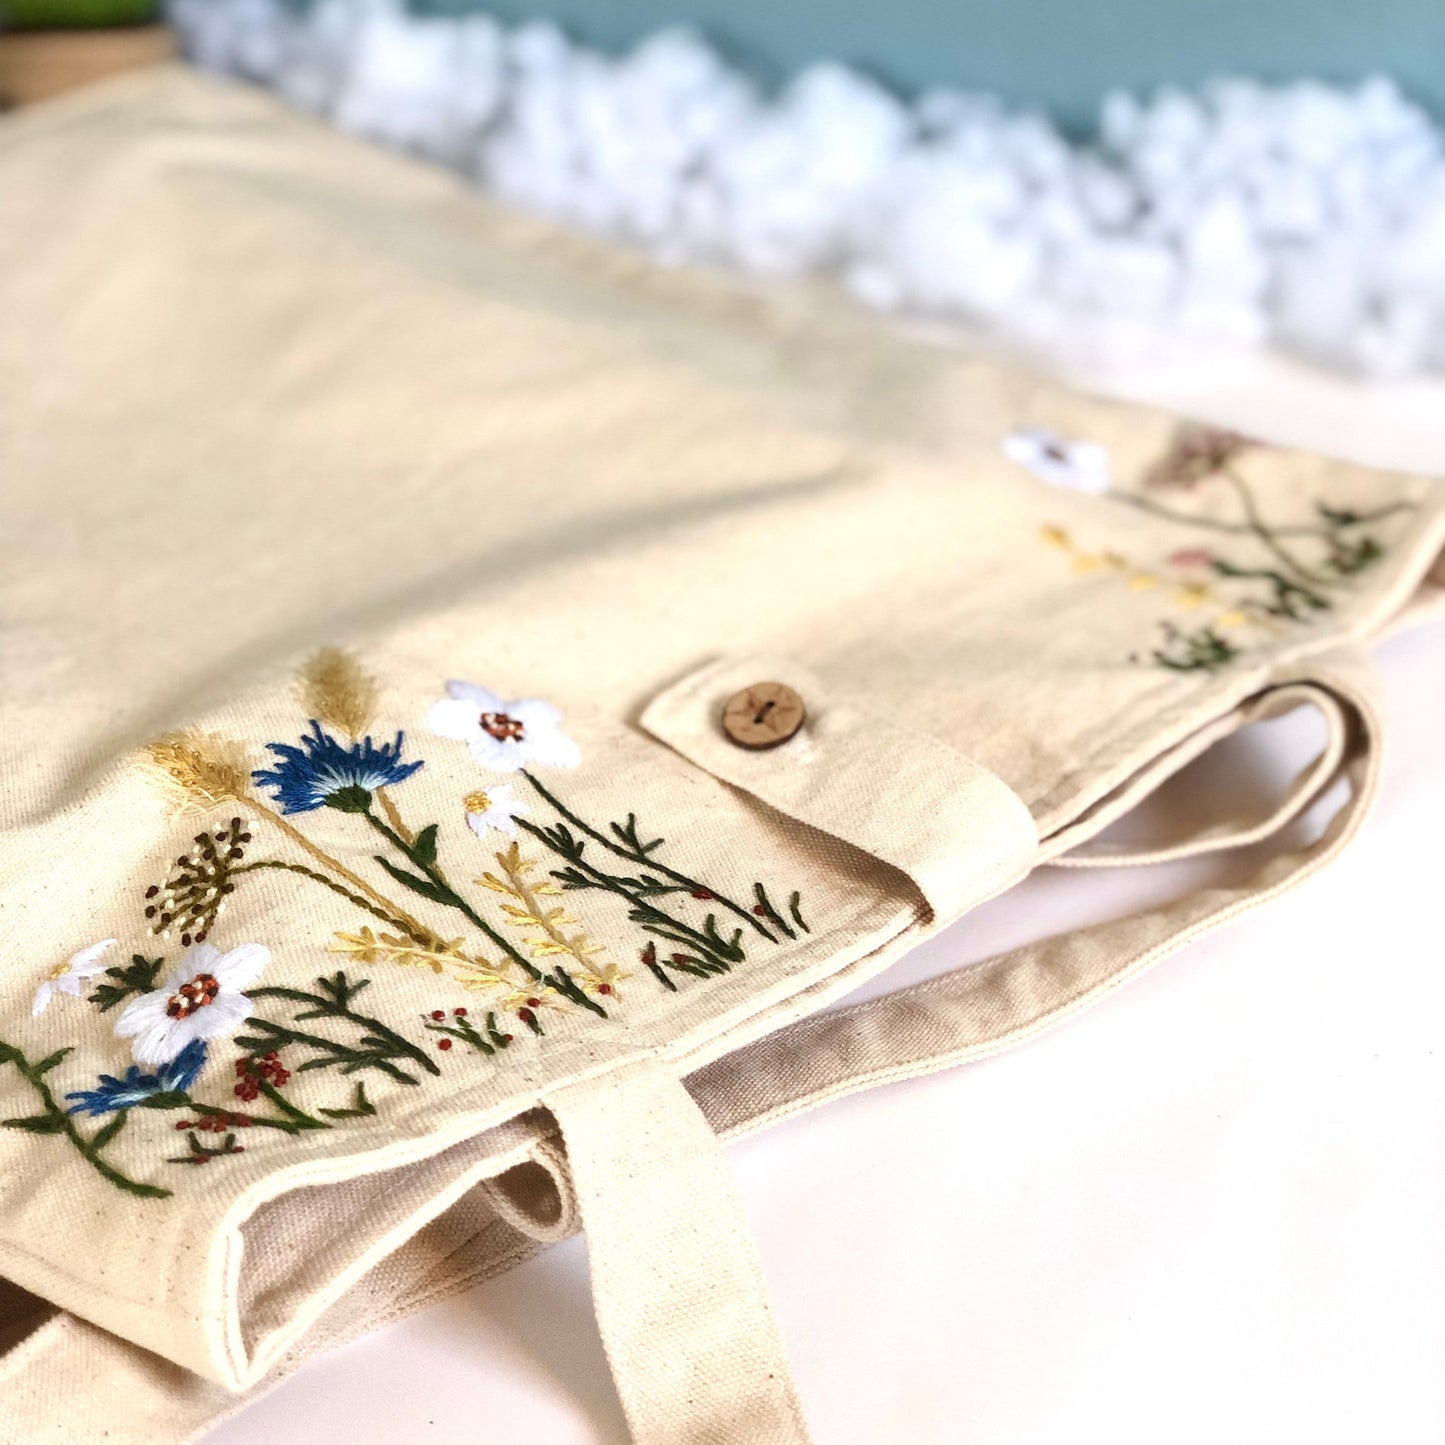 Handmade Embroidery Floral Linen Tote Bag Flowers